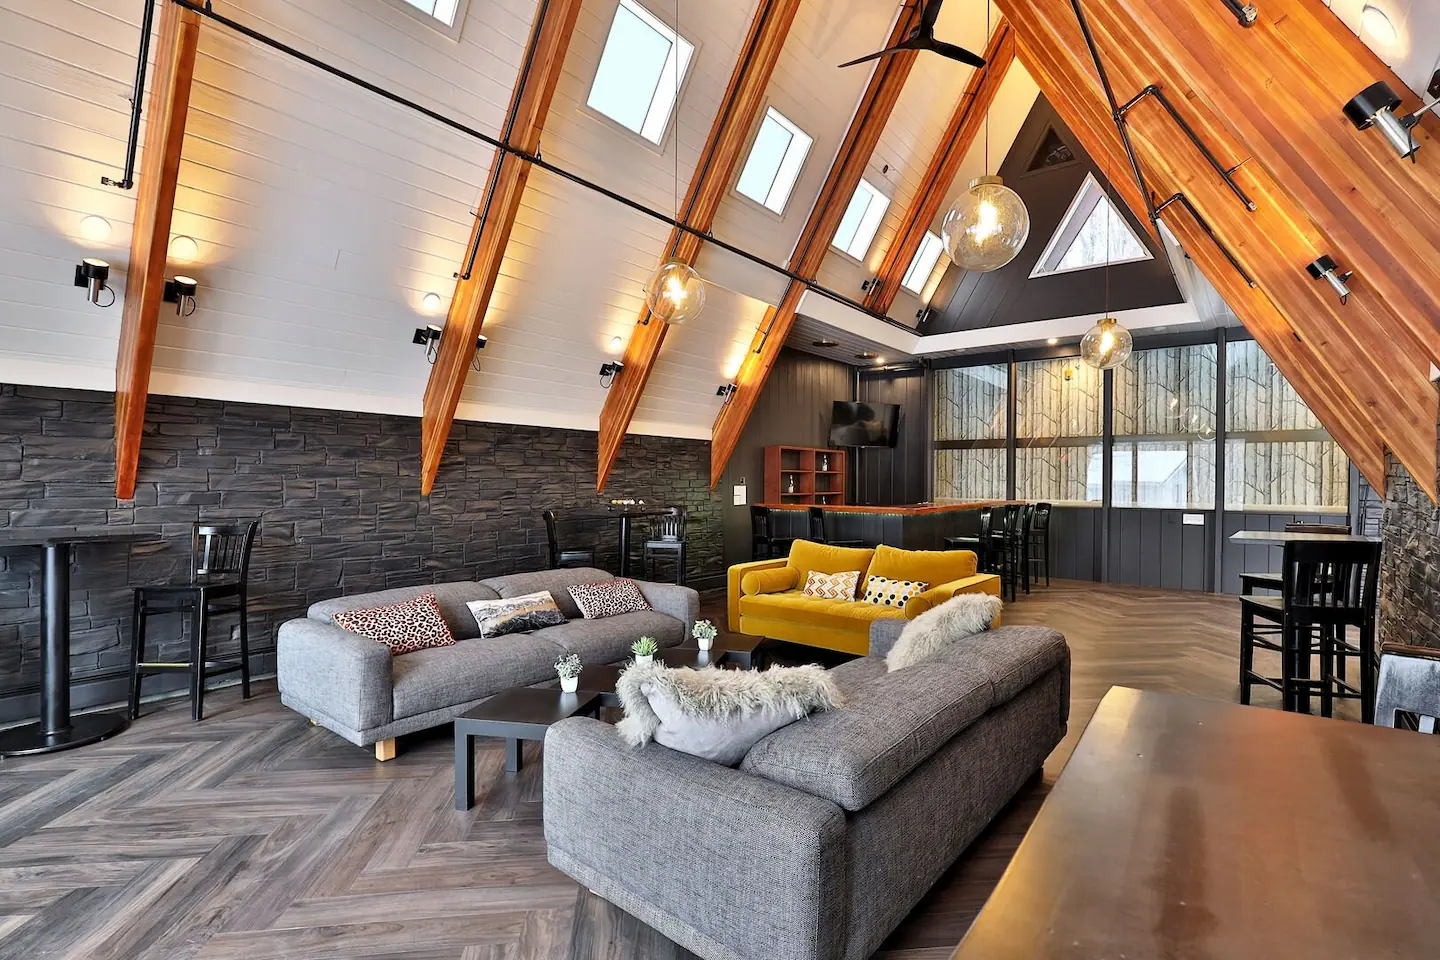 Beautiful living room of a Killington boutique hotel with three sofas